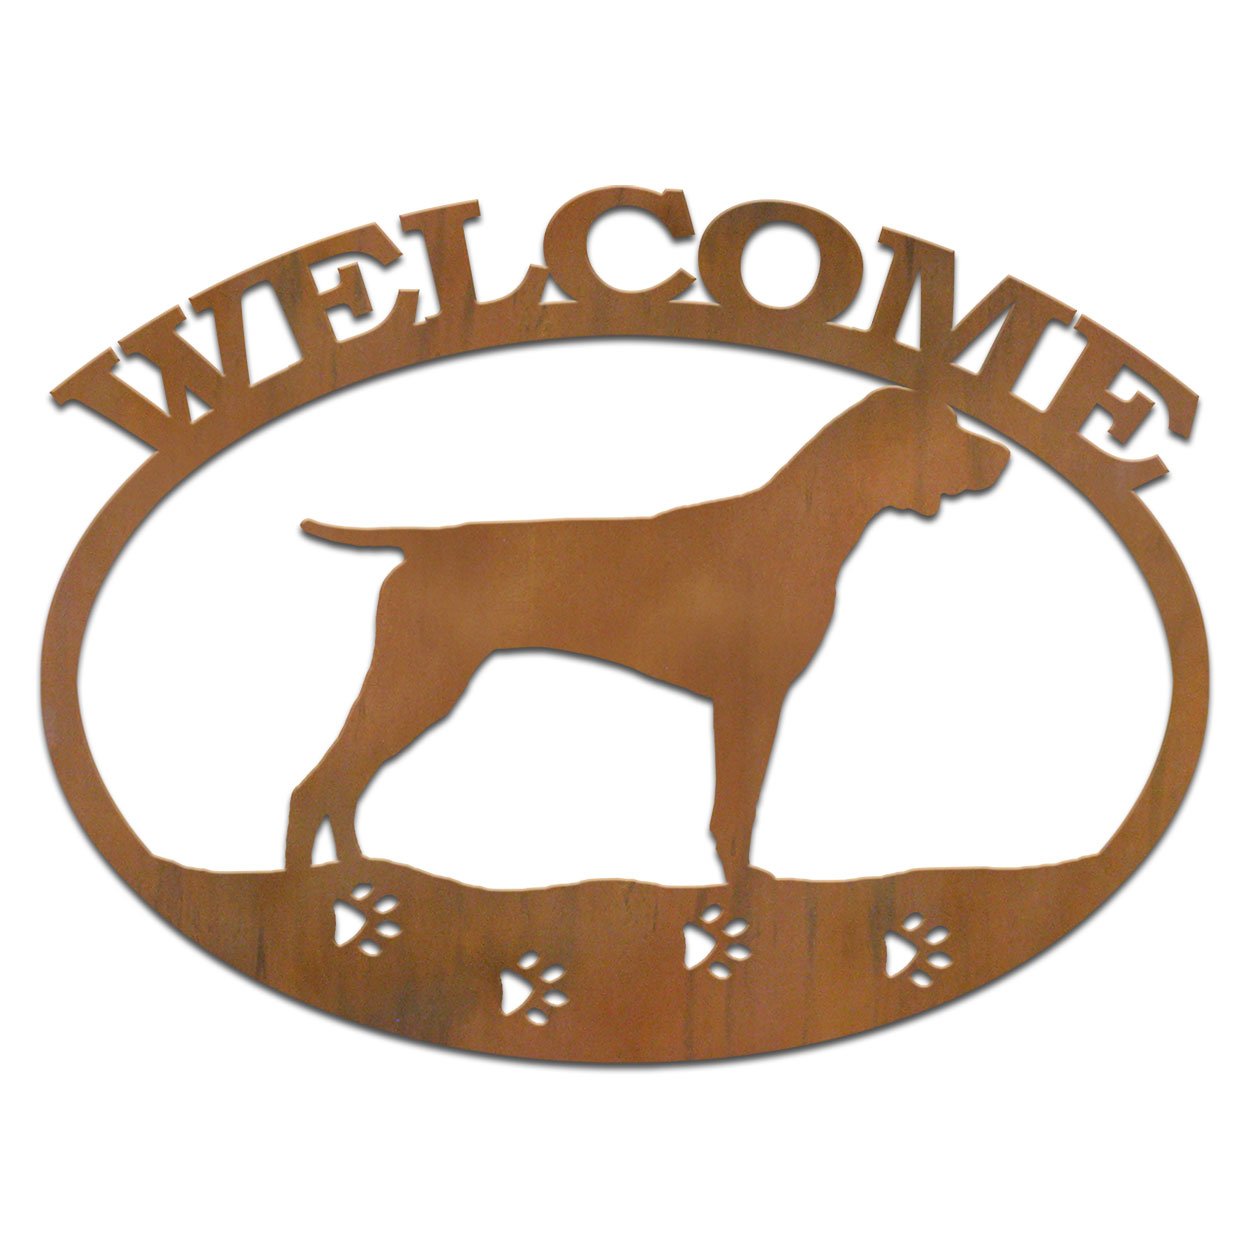 601215 - Shorthaired Pointer Metal Welcome Sign